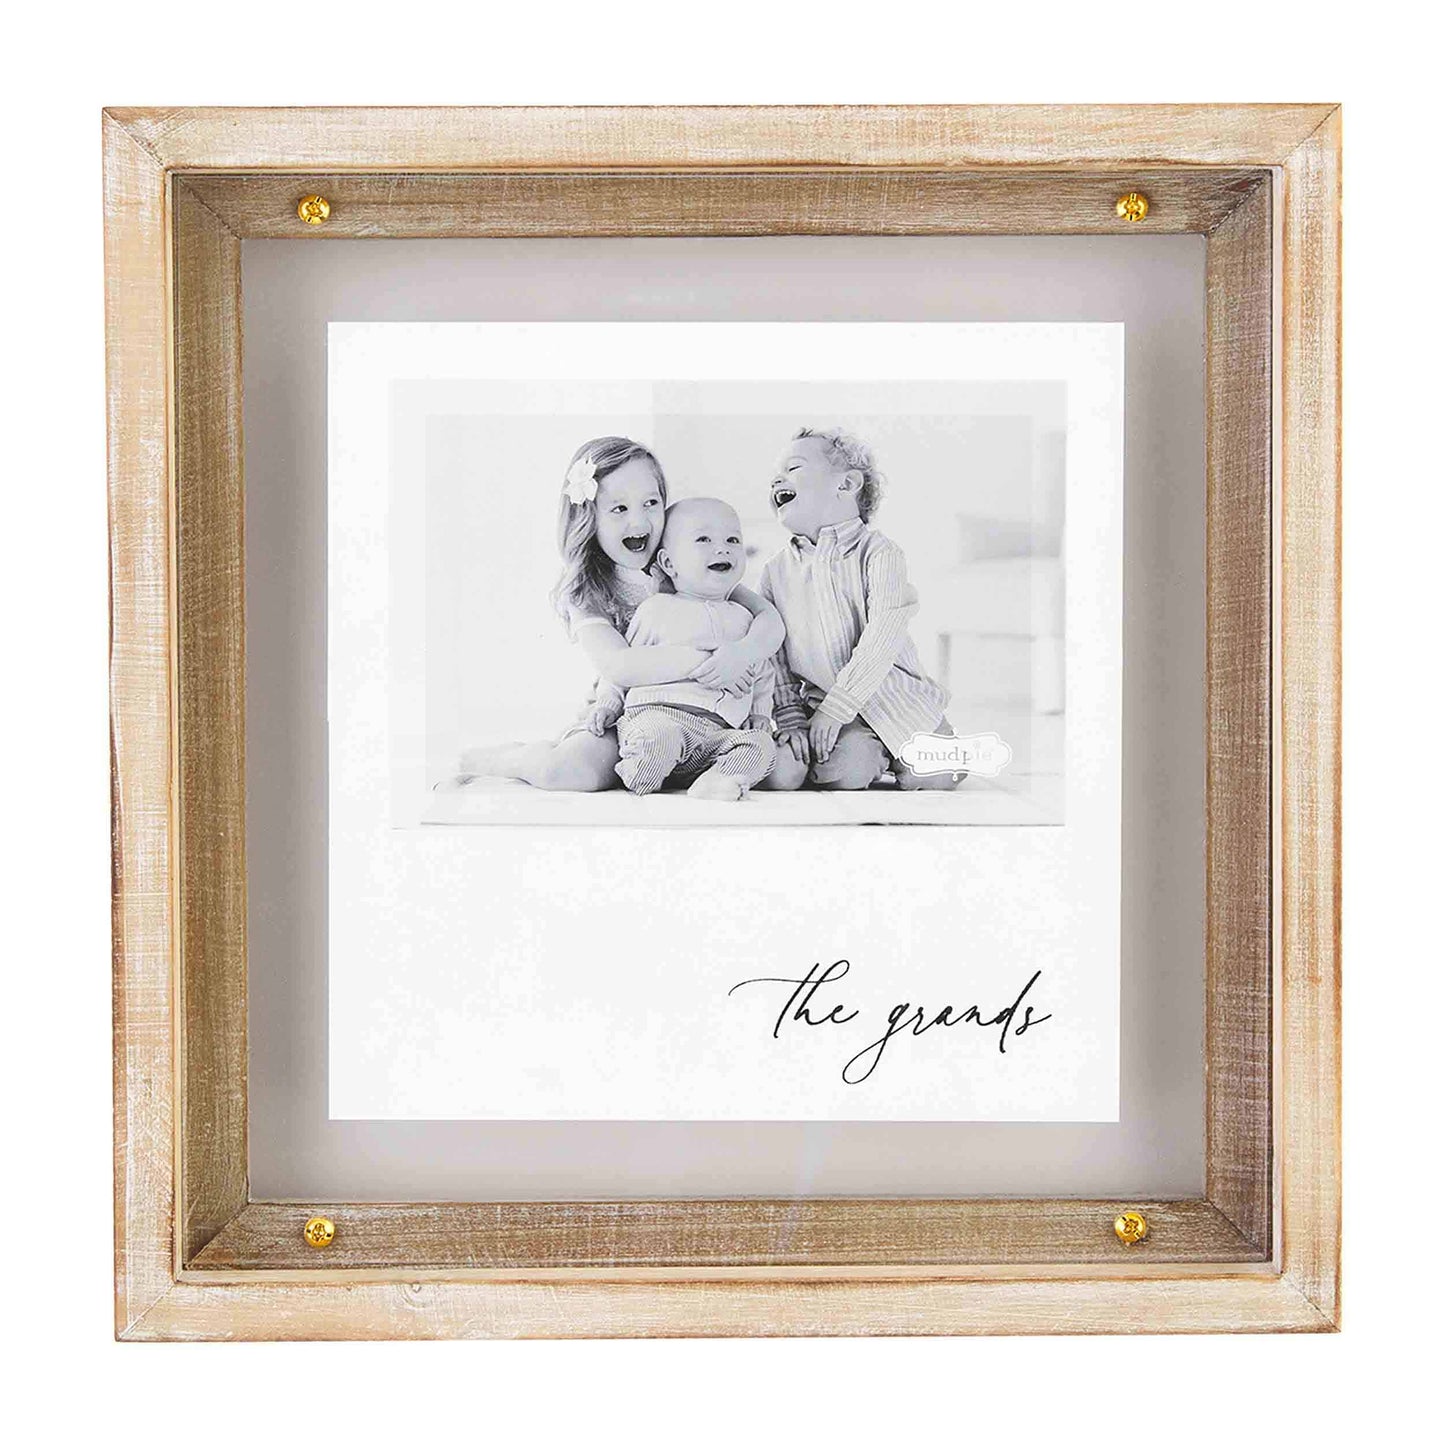 the grands wooden frame on a white background.